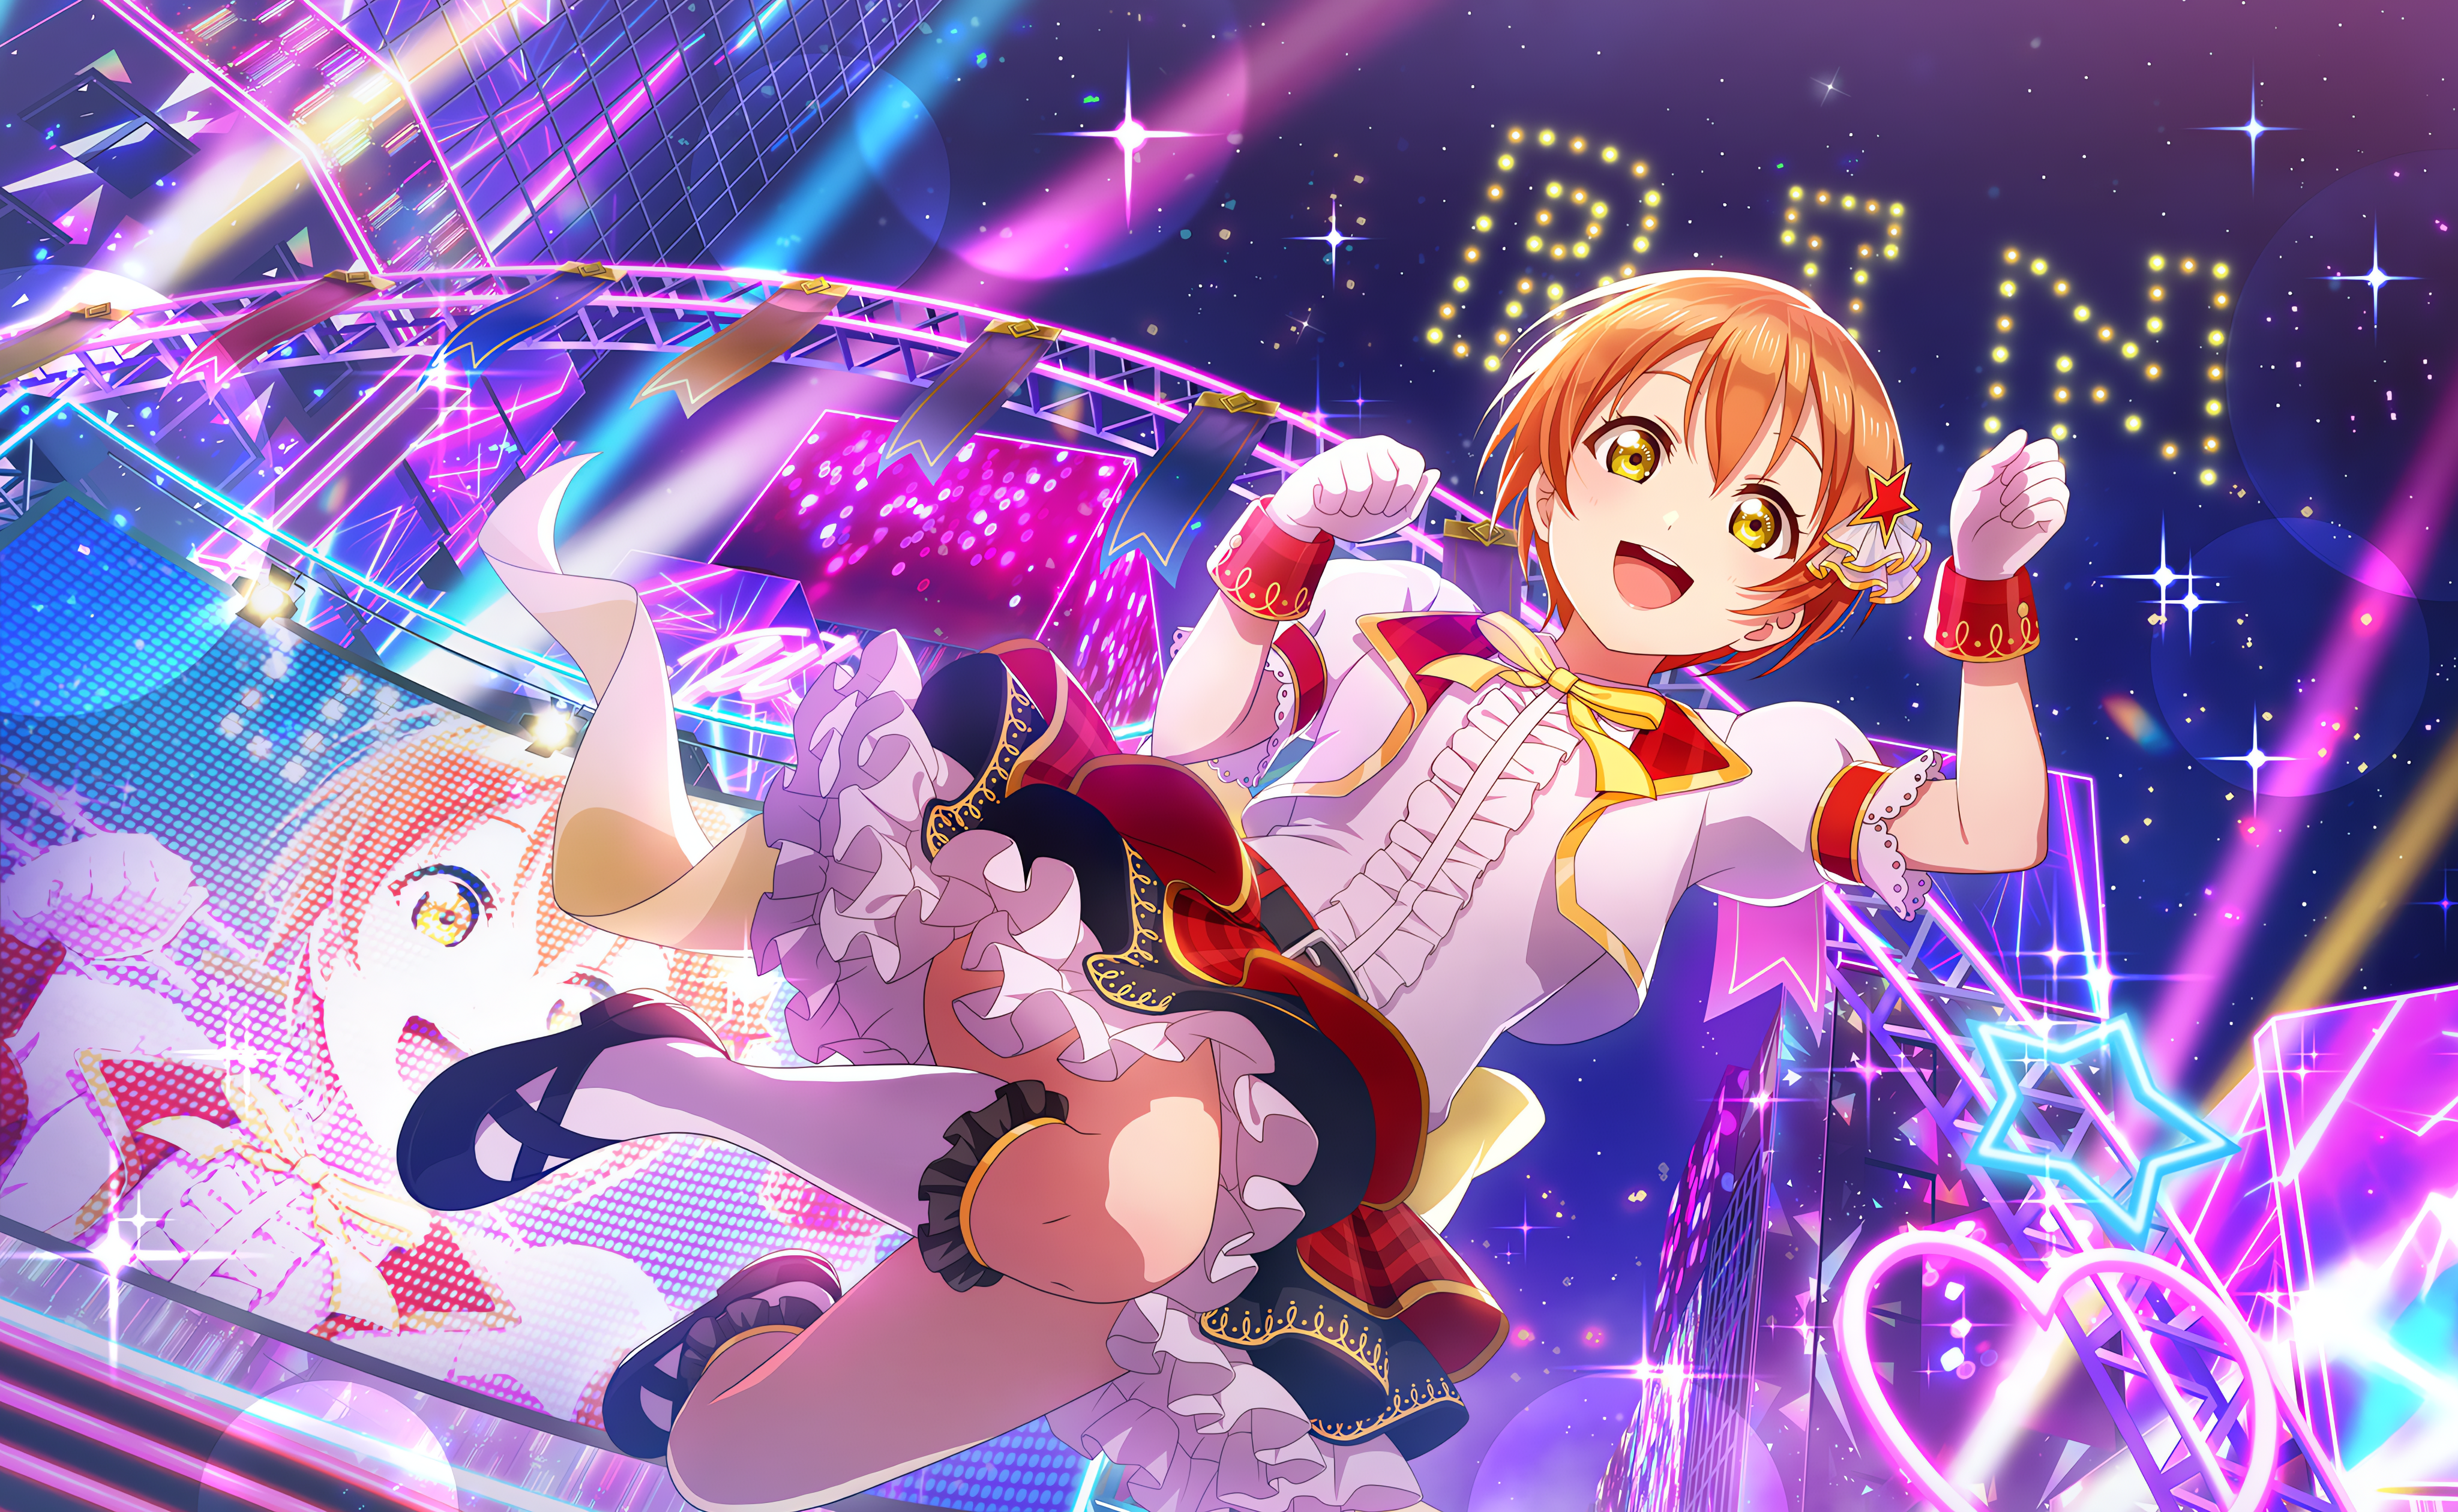 Anime 4096x2520 Hoshizora Rin Love Live! anime anime girls bow tie open mouth gloves uniform looking at viewer stars sky night short hair stages stage light heart (design)